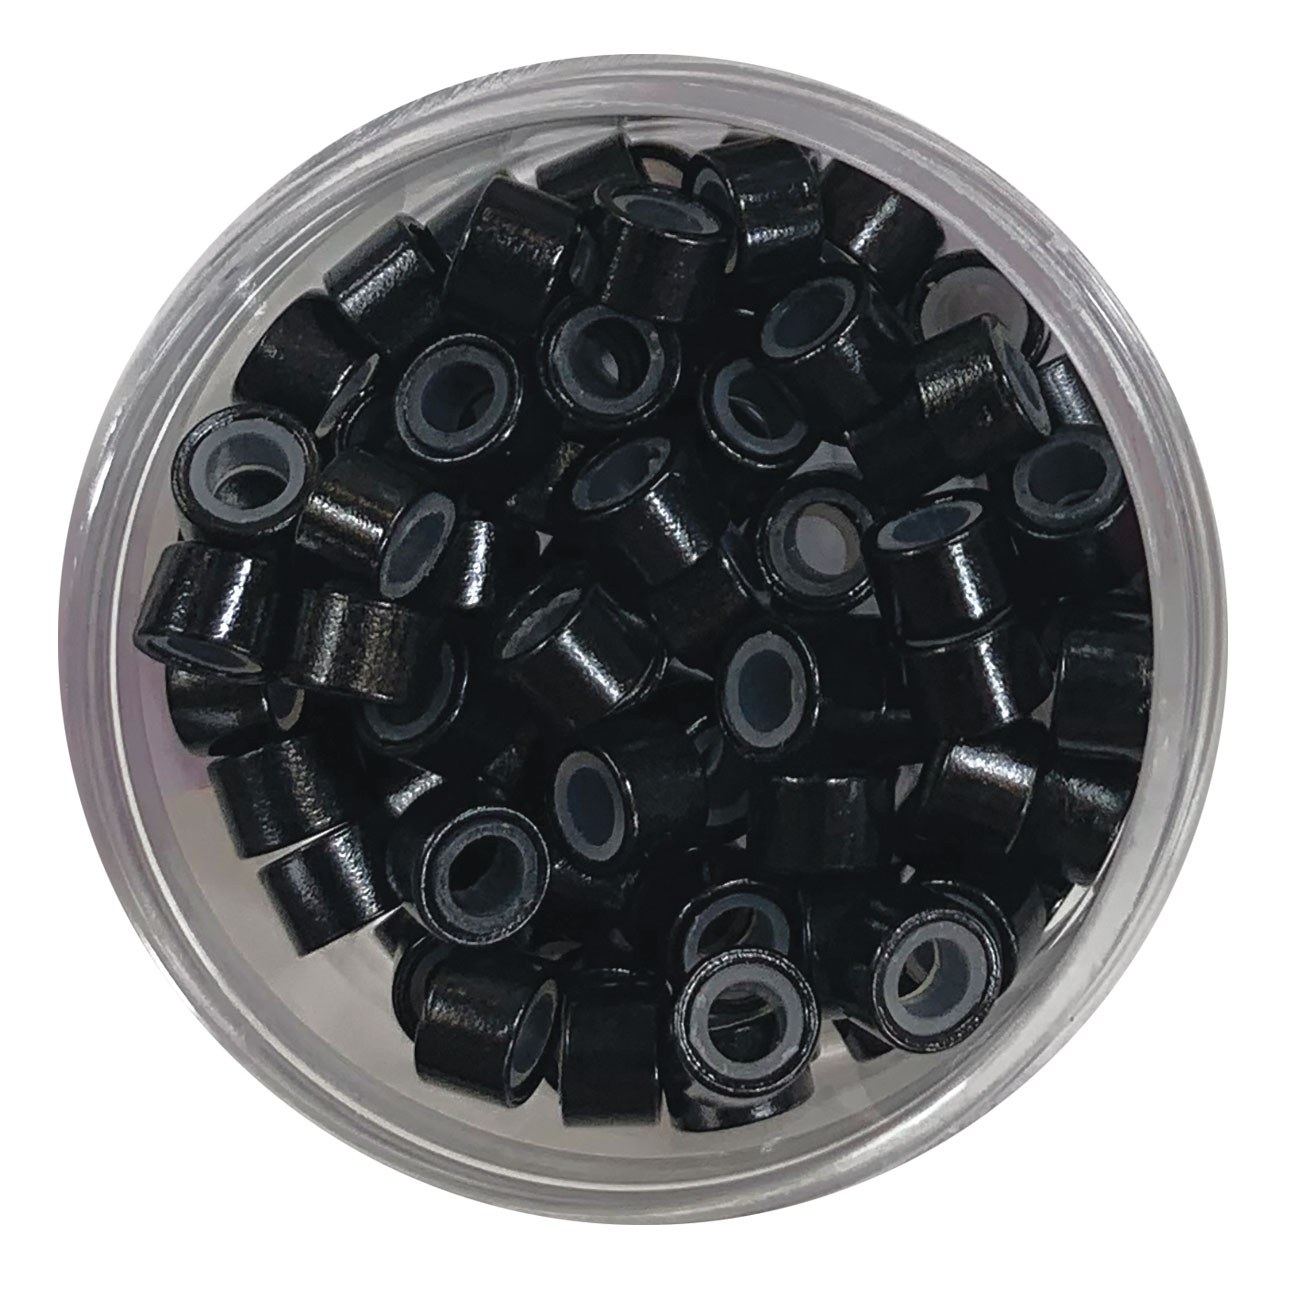 Halo Pro Silicone Beads, Black - 100 Pack